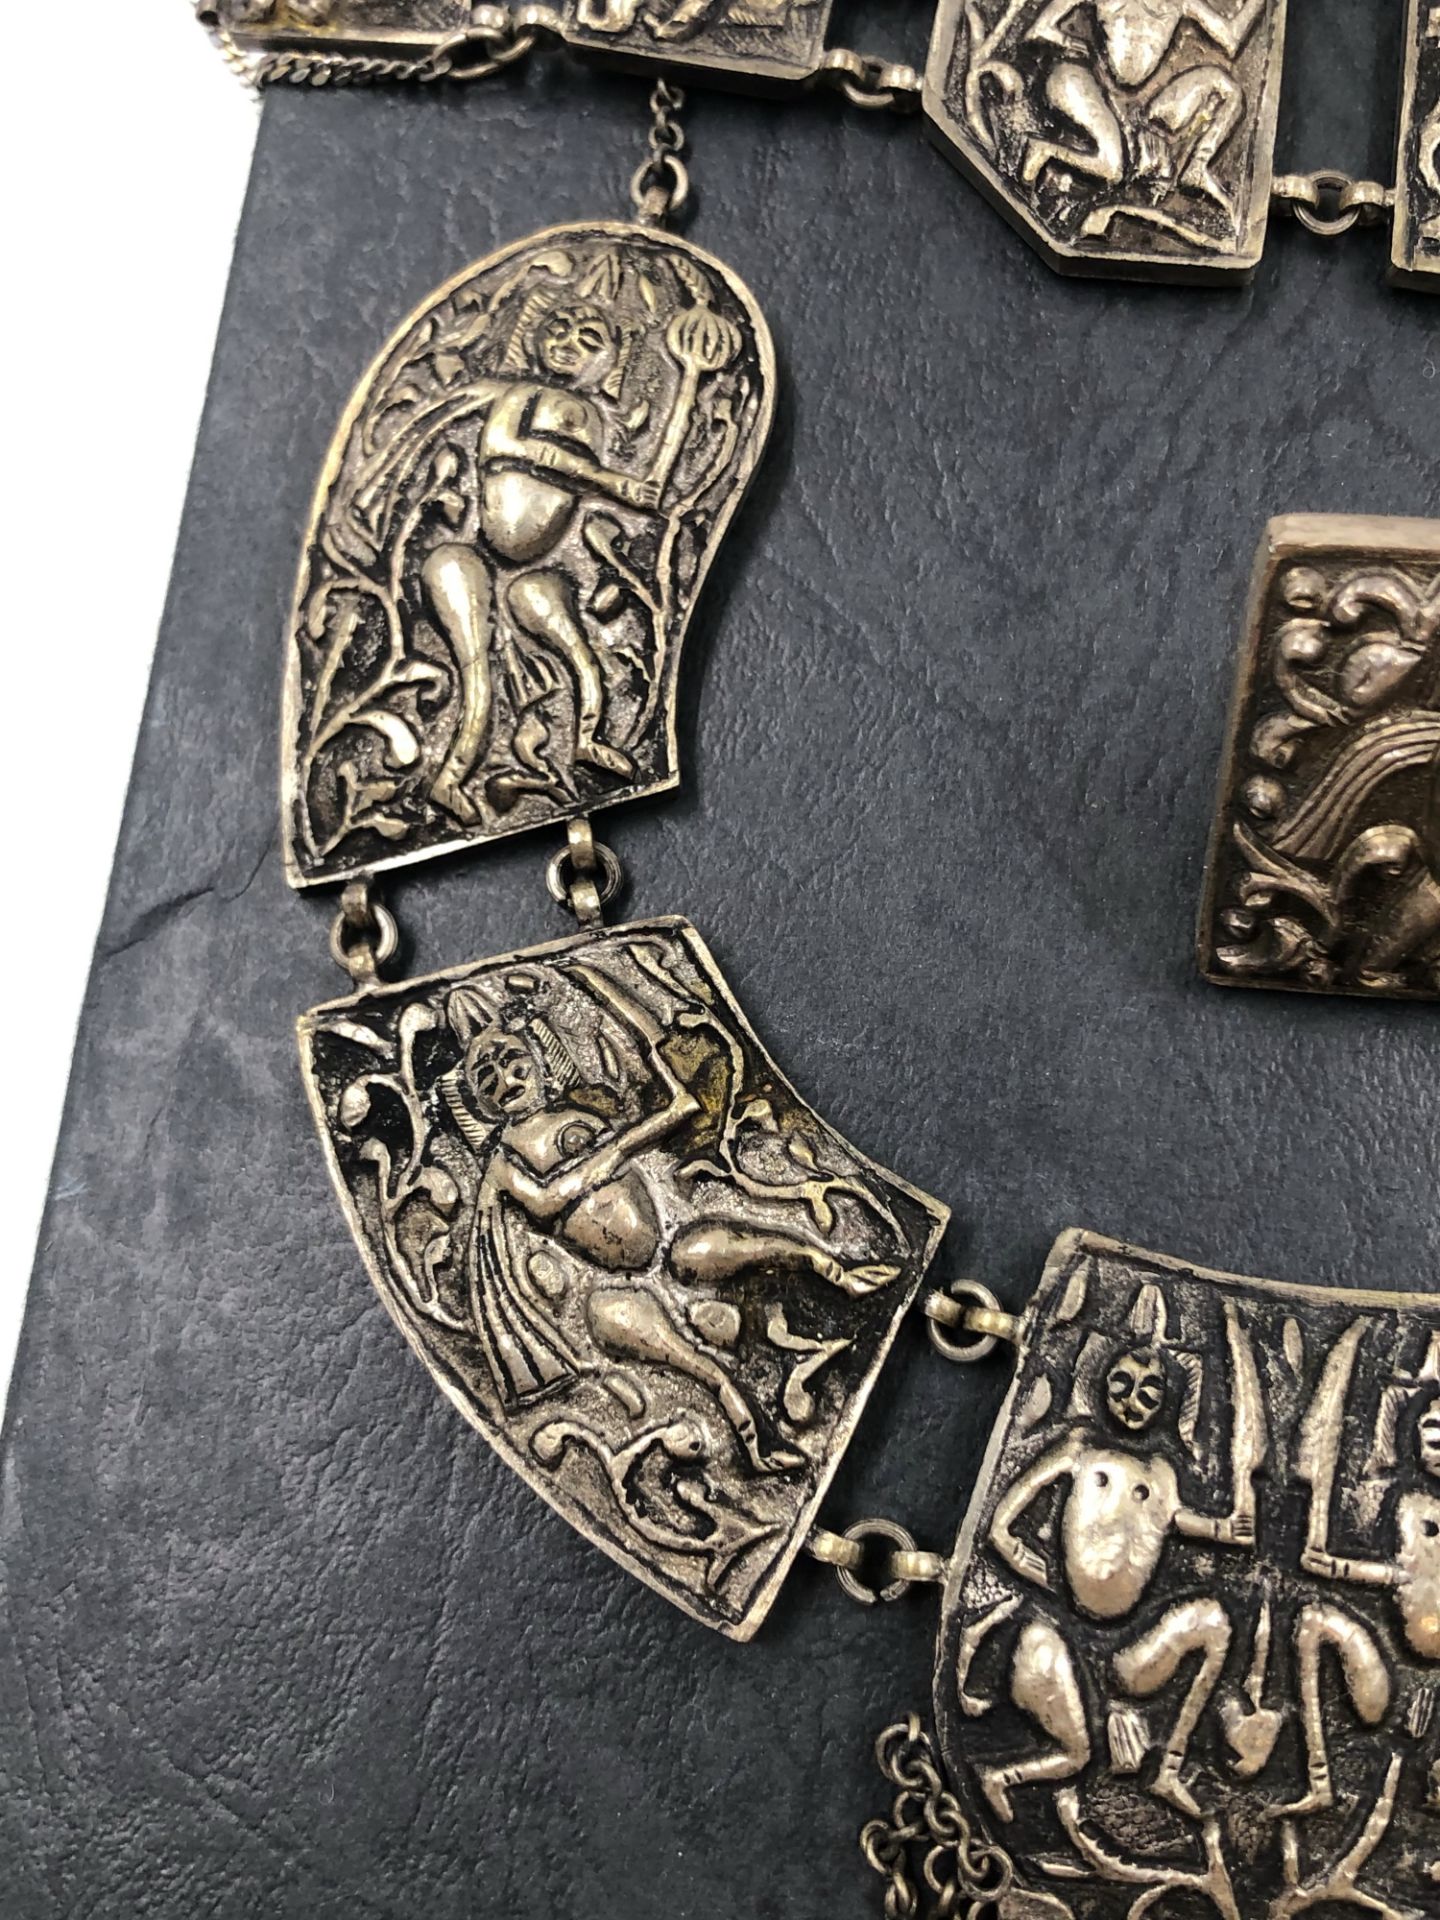 A MULTI PANEL NECKLACE, BRACELET AND RING SUITE. THE PANELS DEPICTING FIGURES IN VARIOUS SCENES. - Image 4 of 7